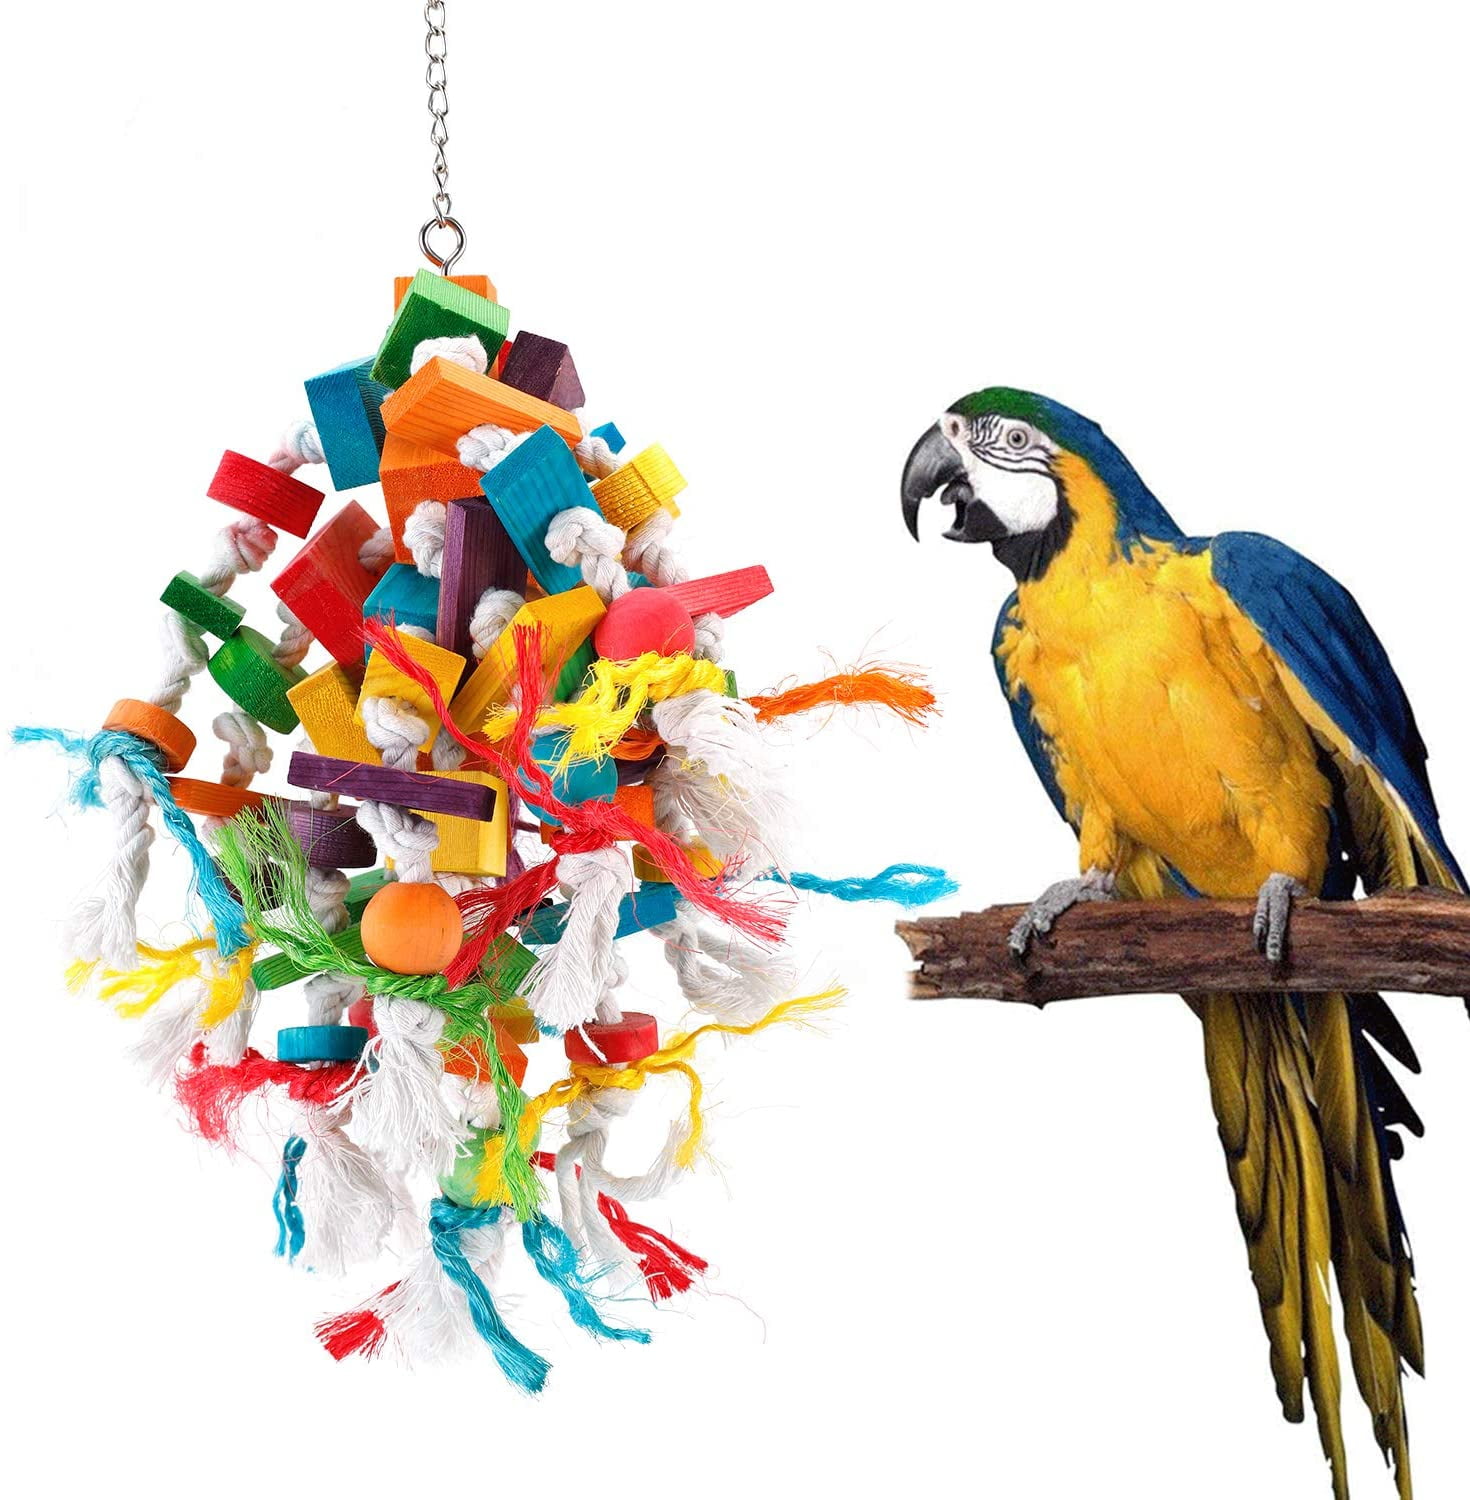 This Ball Have All bird parrot toy cage toys mini macaw cockatoo senegal amazon 